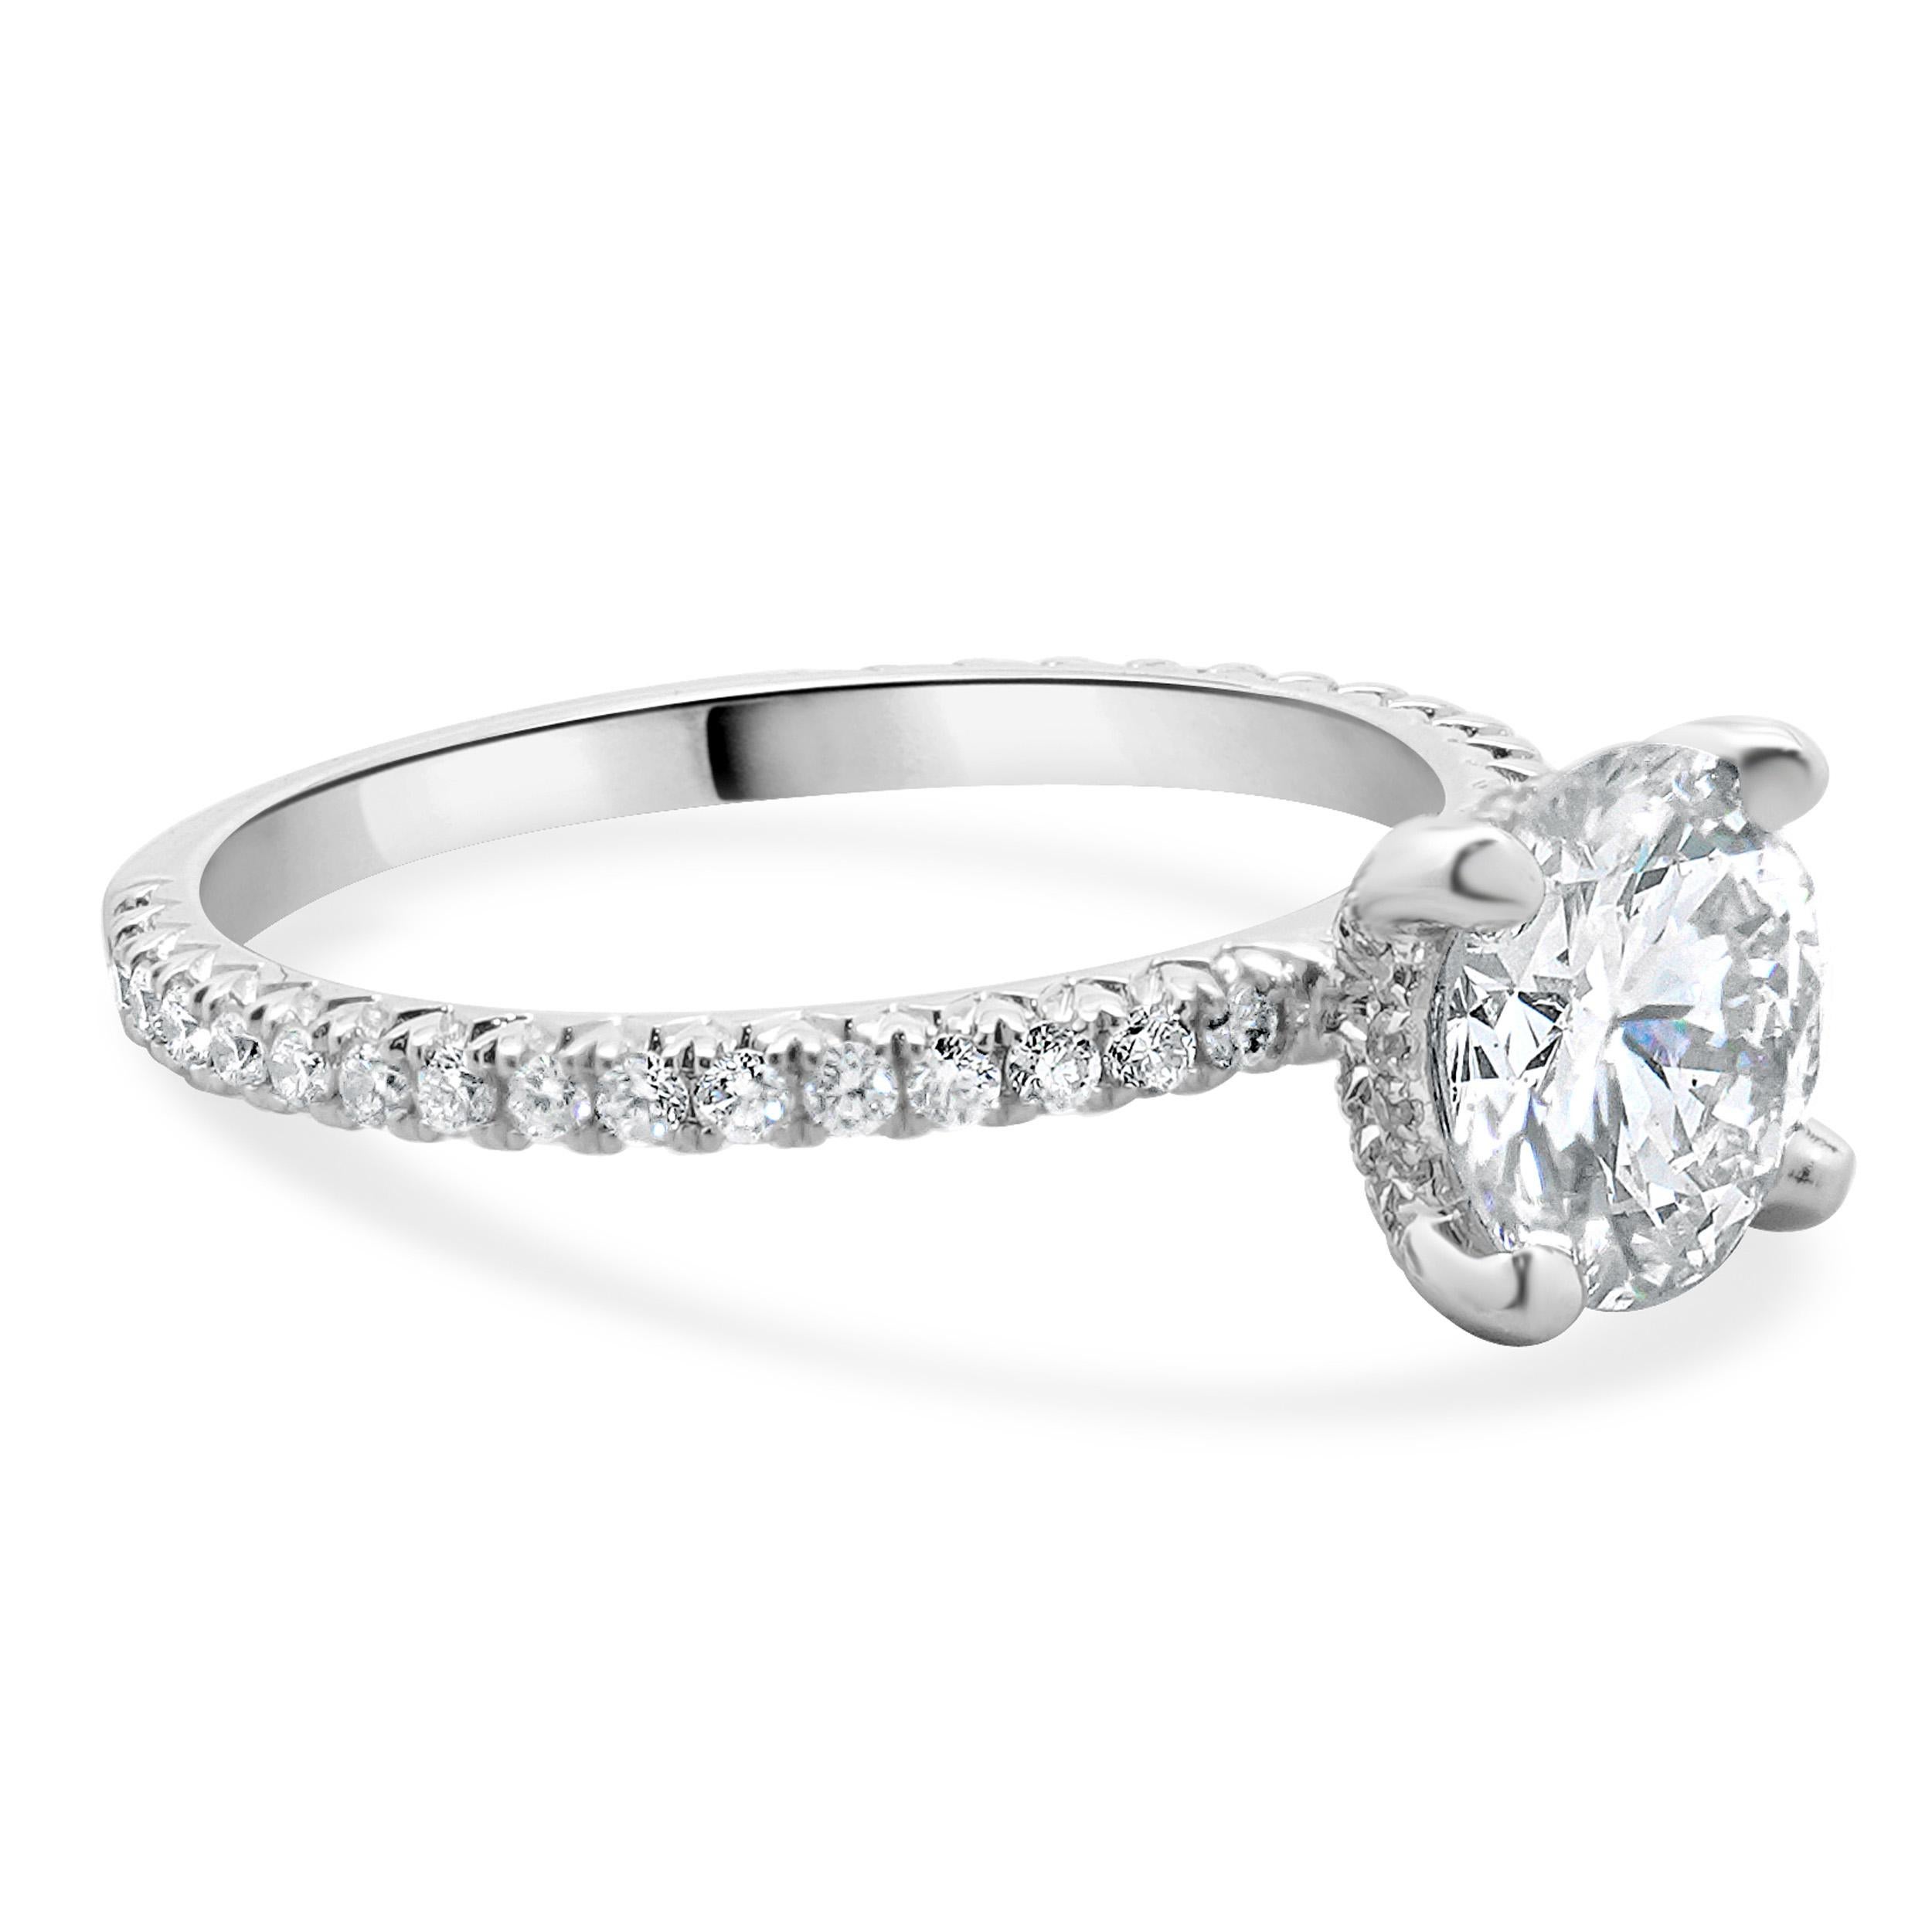 14k White Gold Round Brilliant Cut Diamond Engagement Ring In Excellent Condition For Sale In Scottsdale, AZ